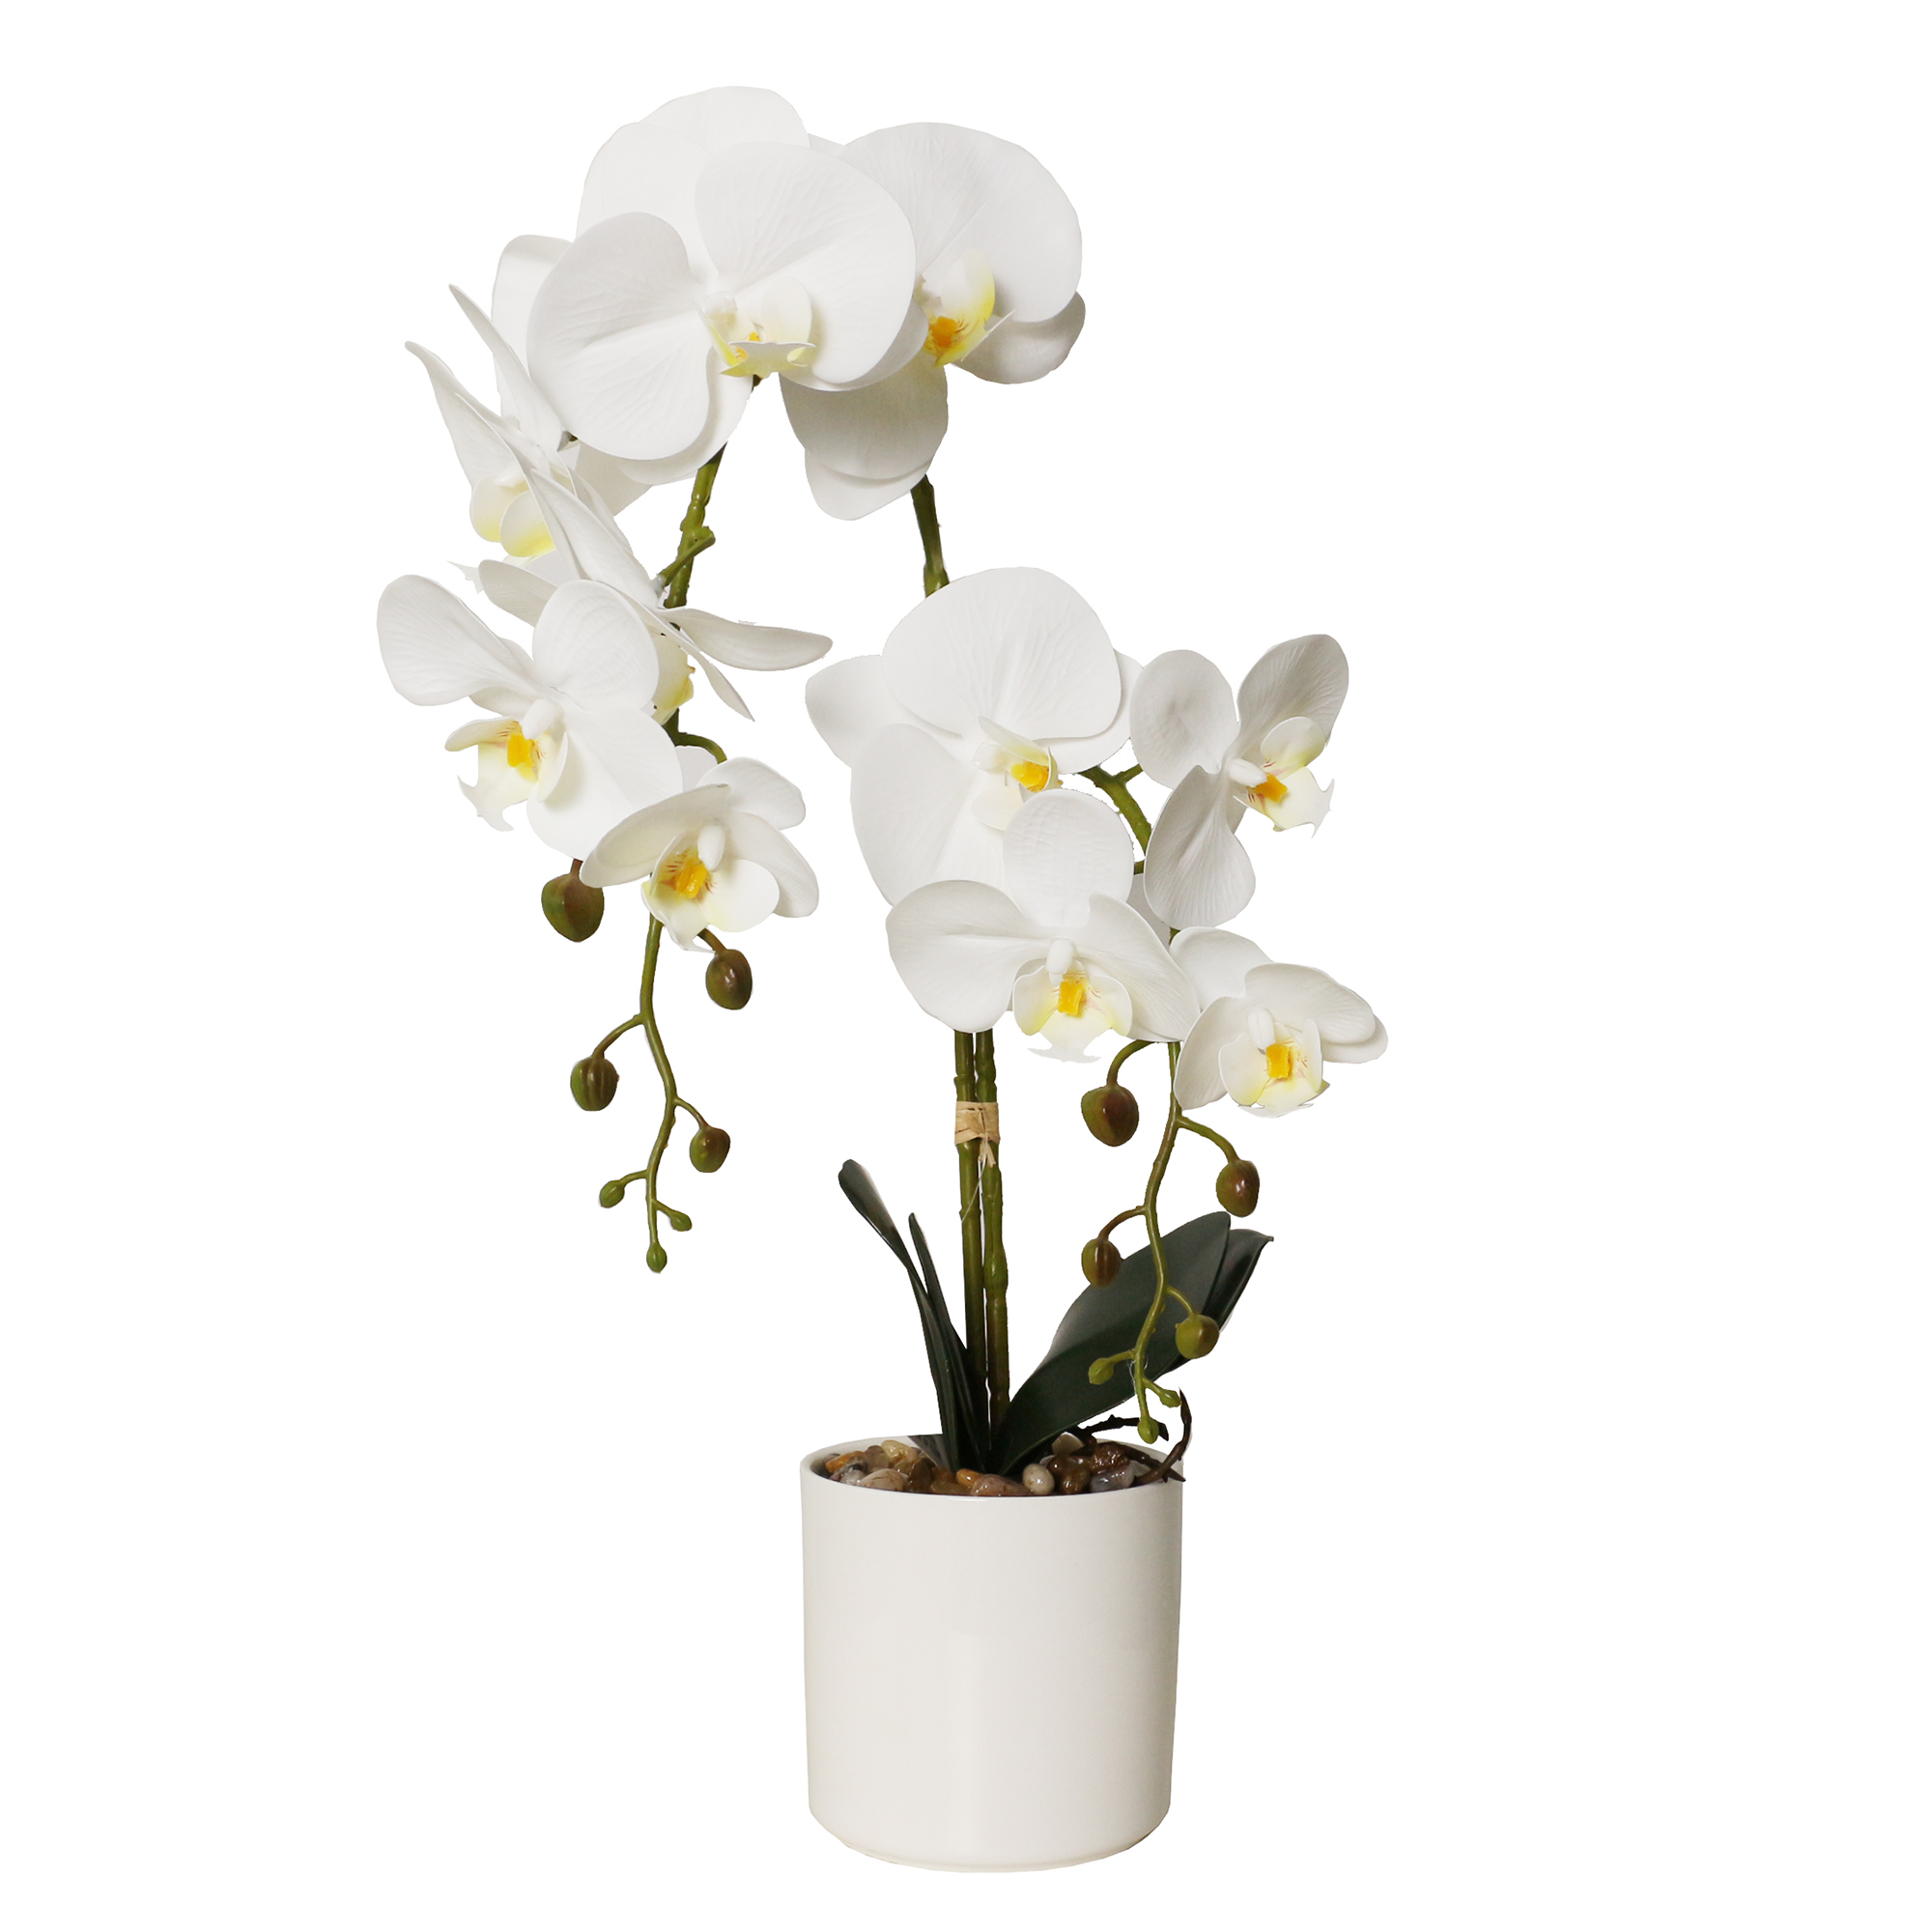 Potted Phalaenopsis 15 Orchids in White Ceramic Pot